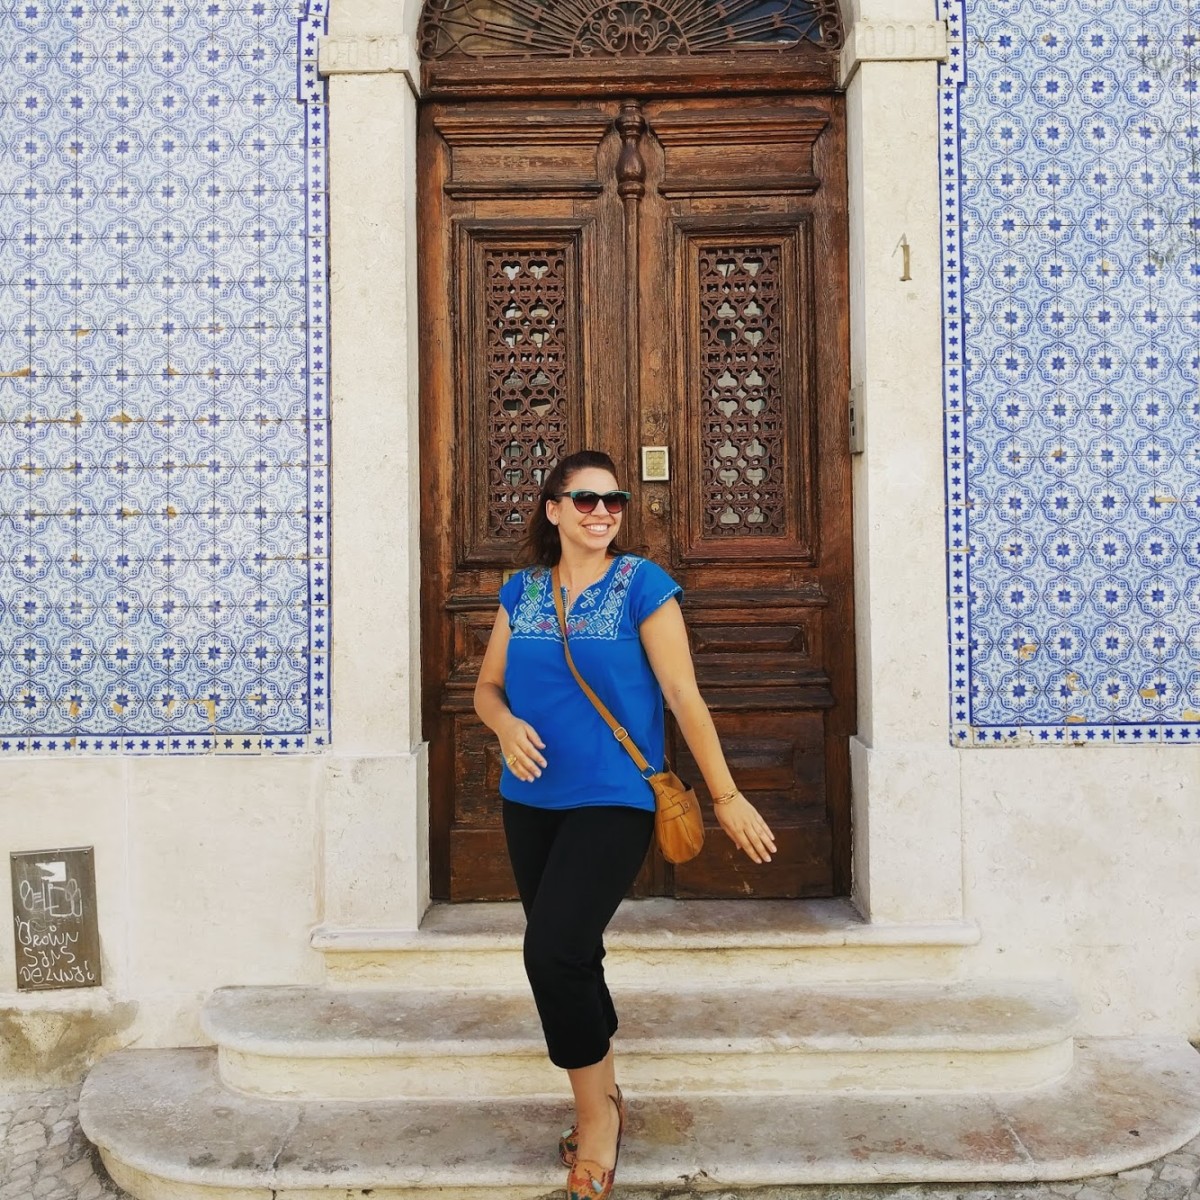 Lolly stands in front of a wooden door in Lisbon where walls on both sides of the door are covered in classic Portuguese blue tiles